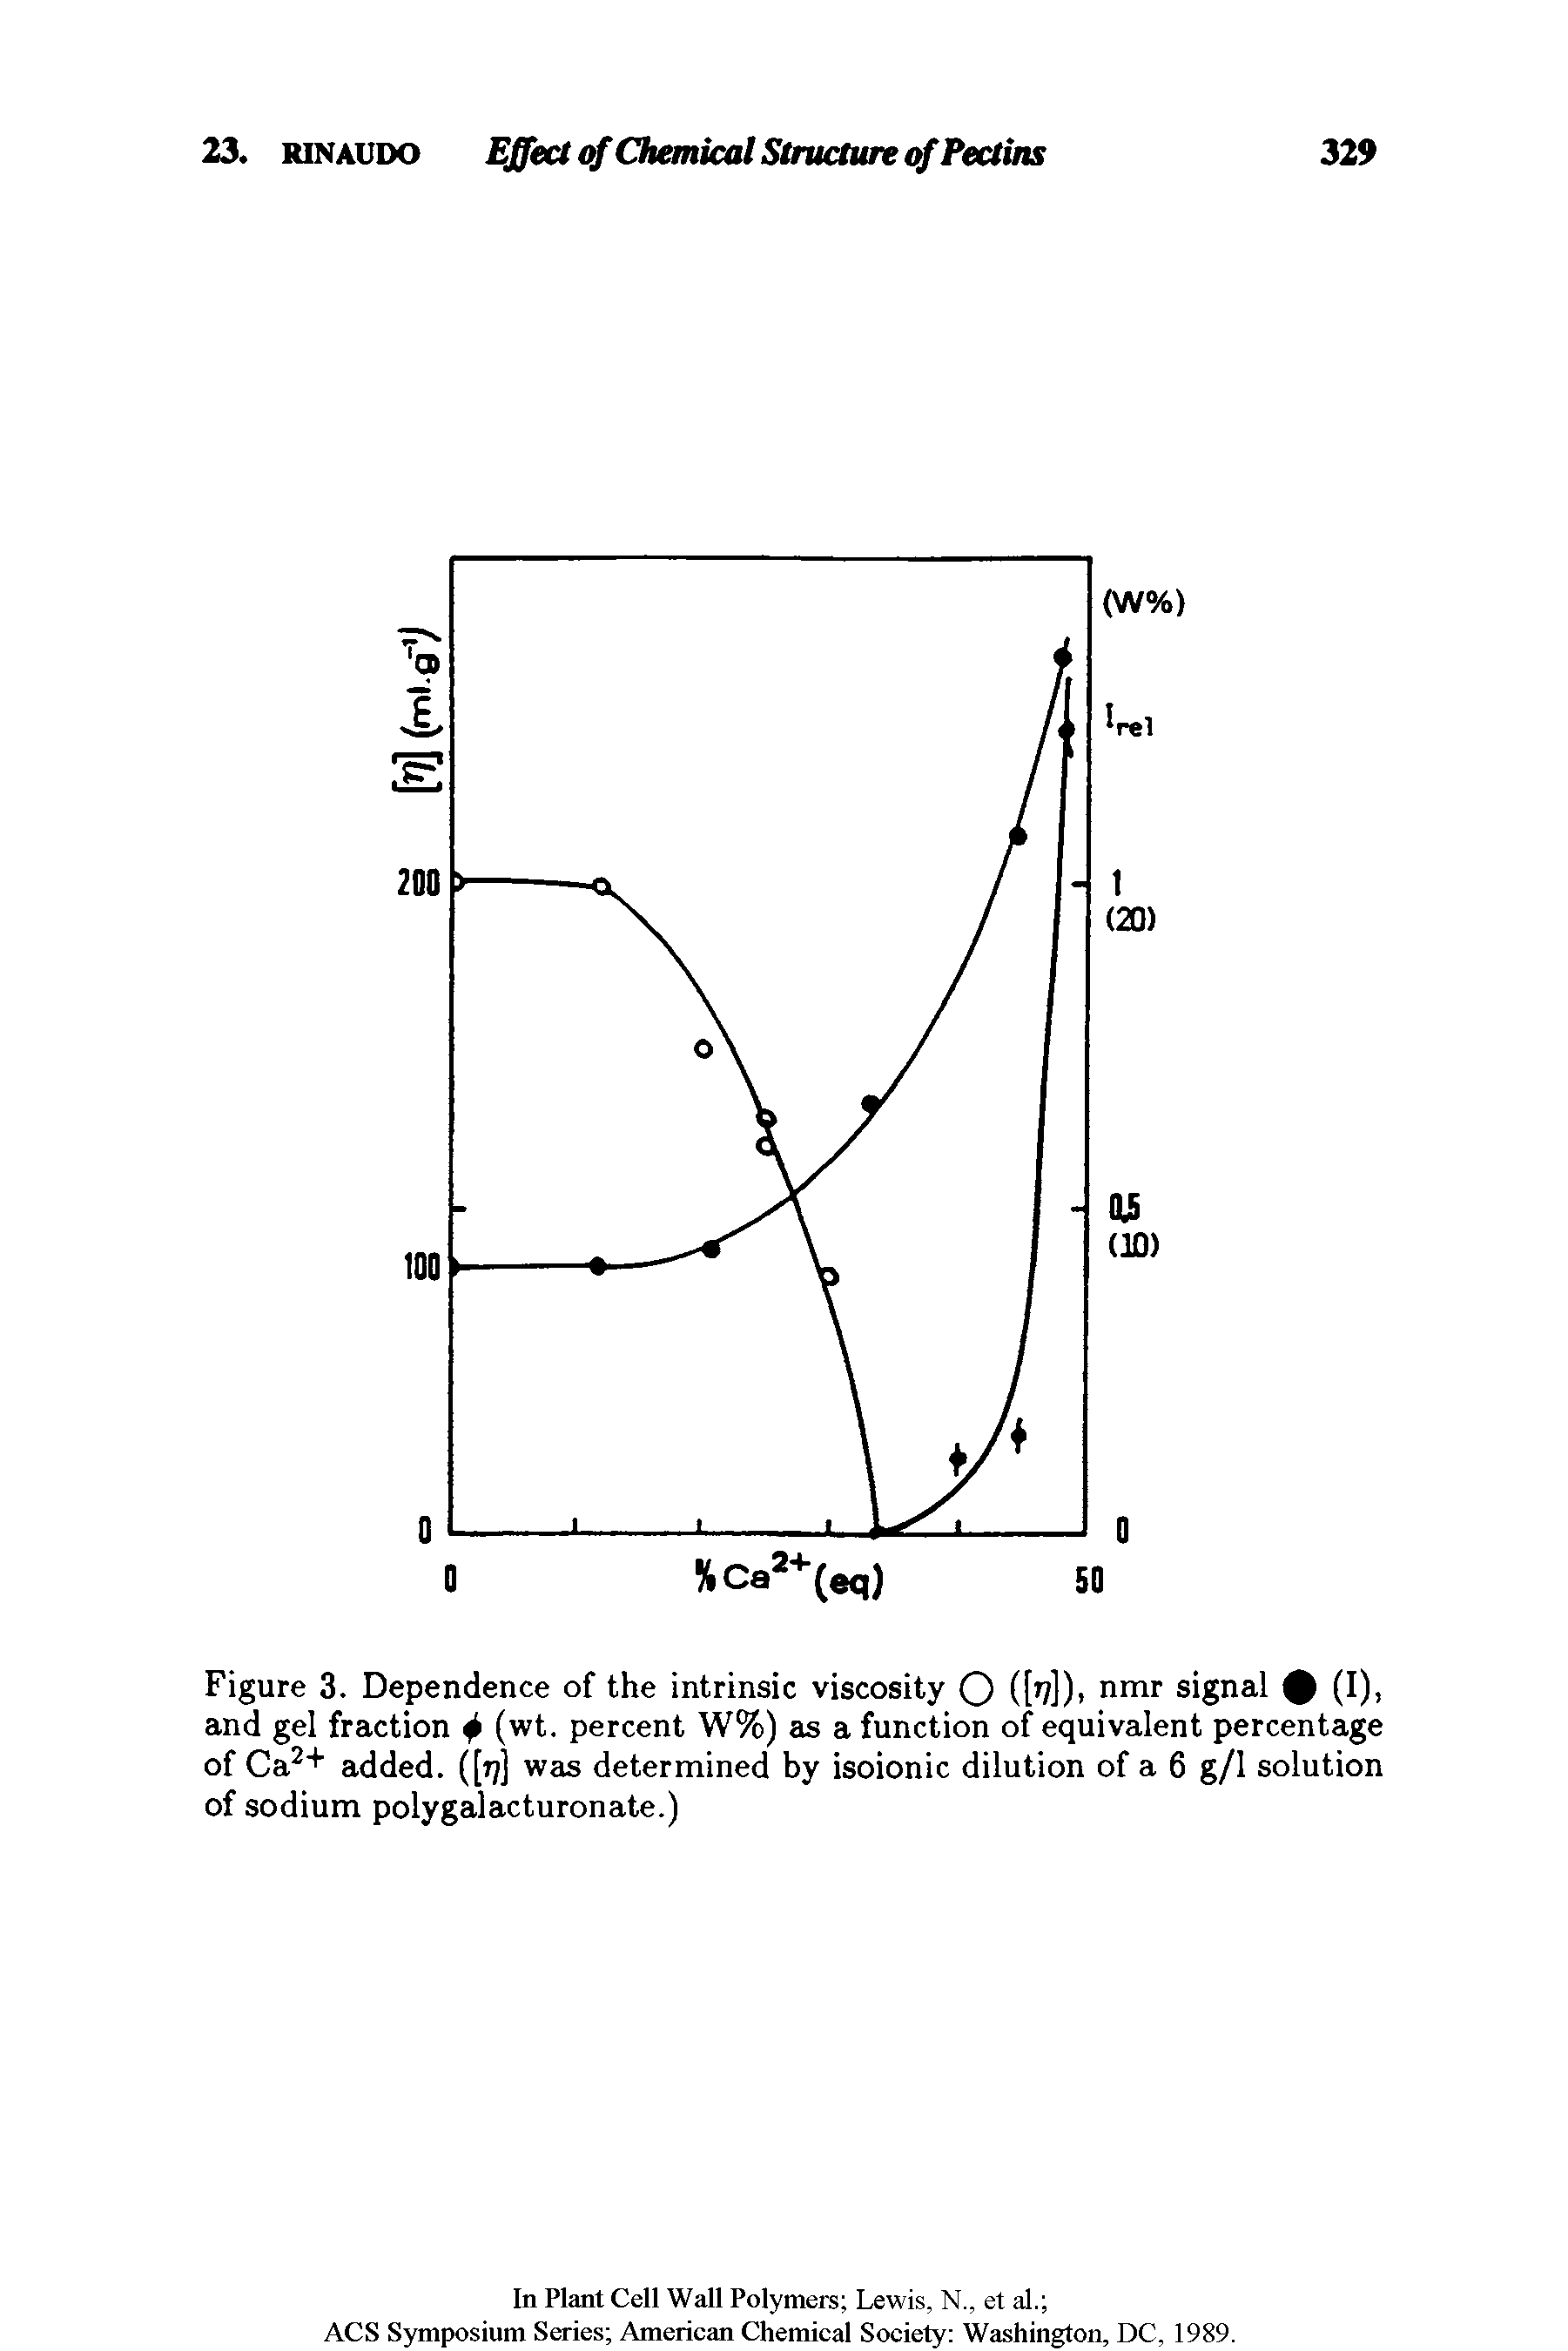 Figure 3. Dependence of the intrinsic viscosity O ([v])> nmr signal 0 (I), and gel fraction + (wt. percent W%) as a function of equivalent percentage of Ca2+ added. ([77] was determined by isoionic dilution of a 6 g/1 solution of sodium polygalacturonate.)...